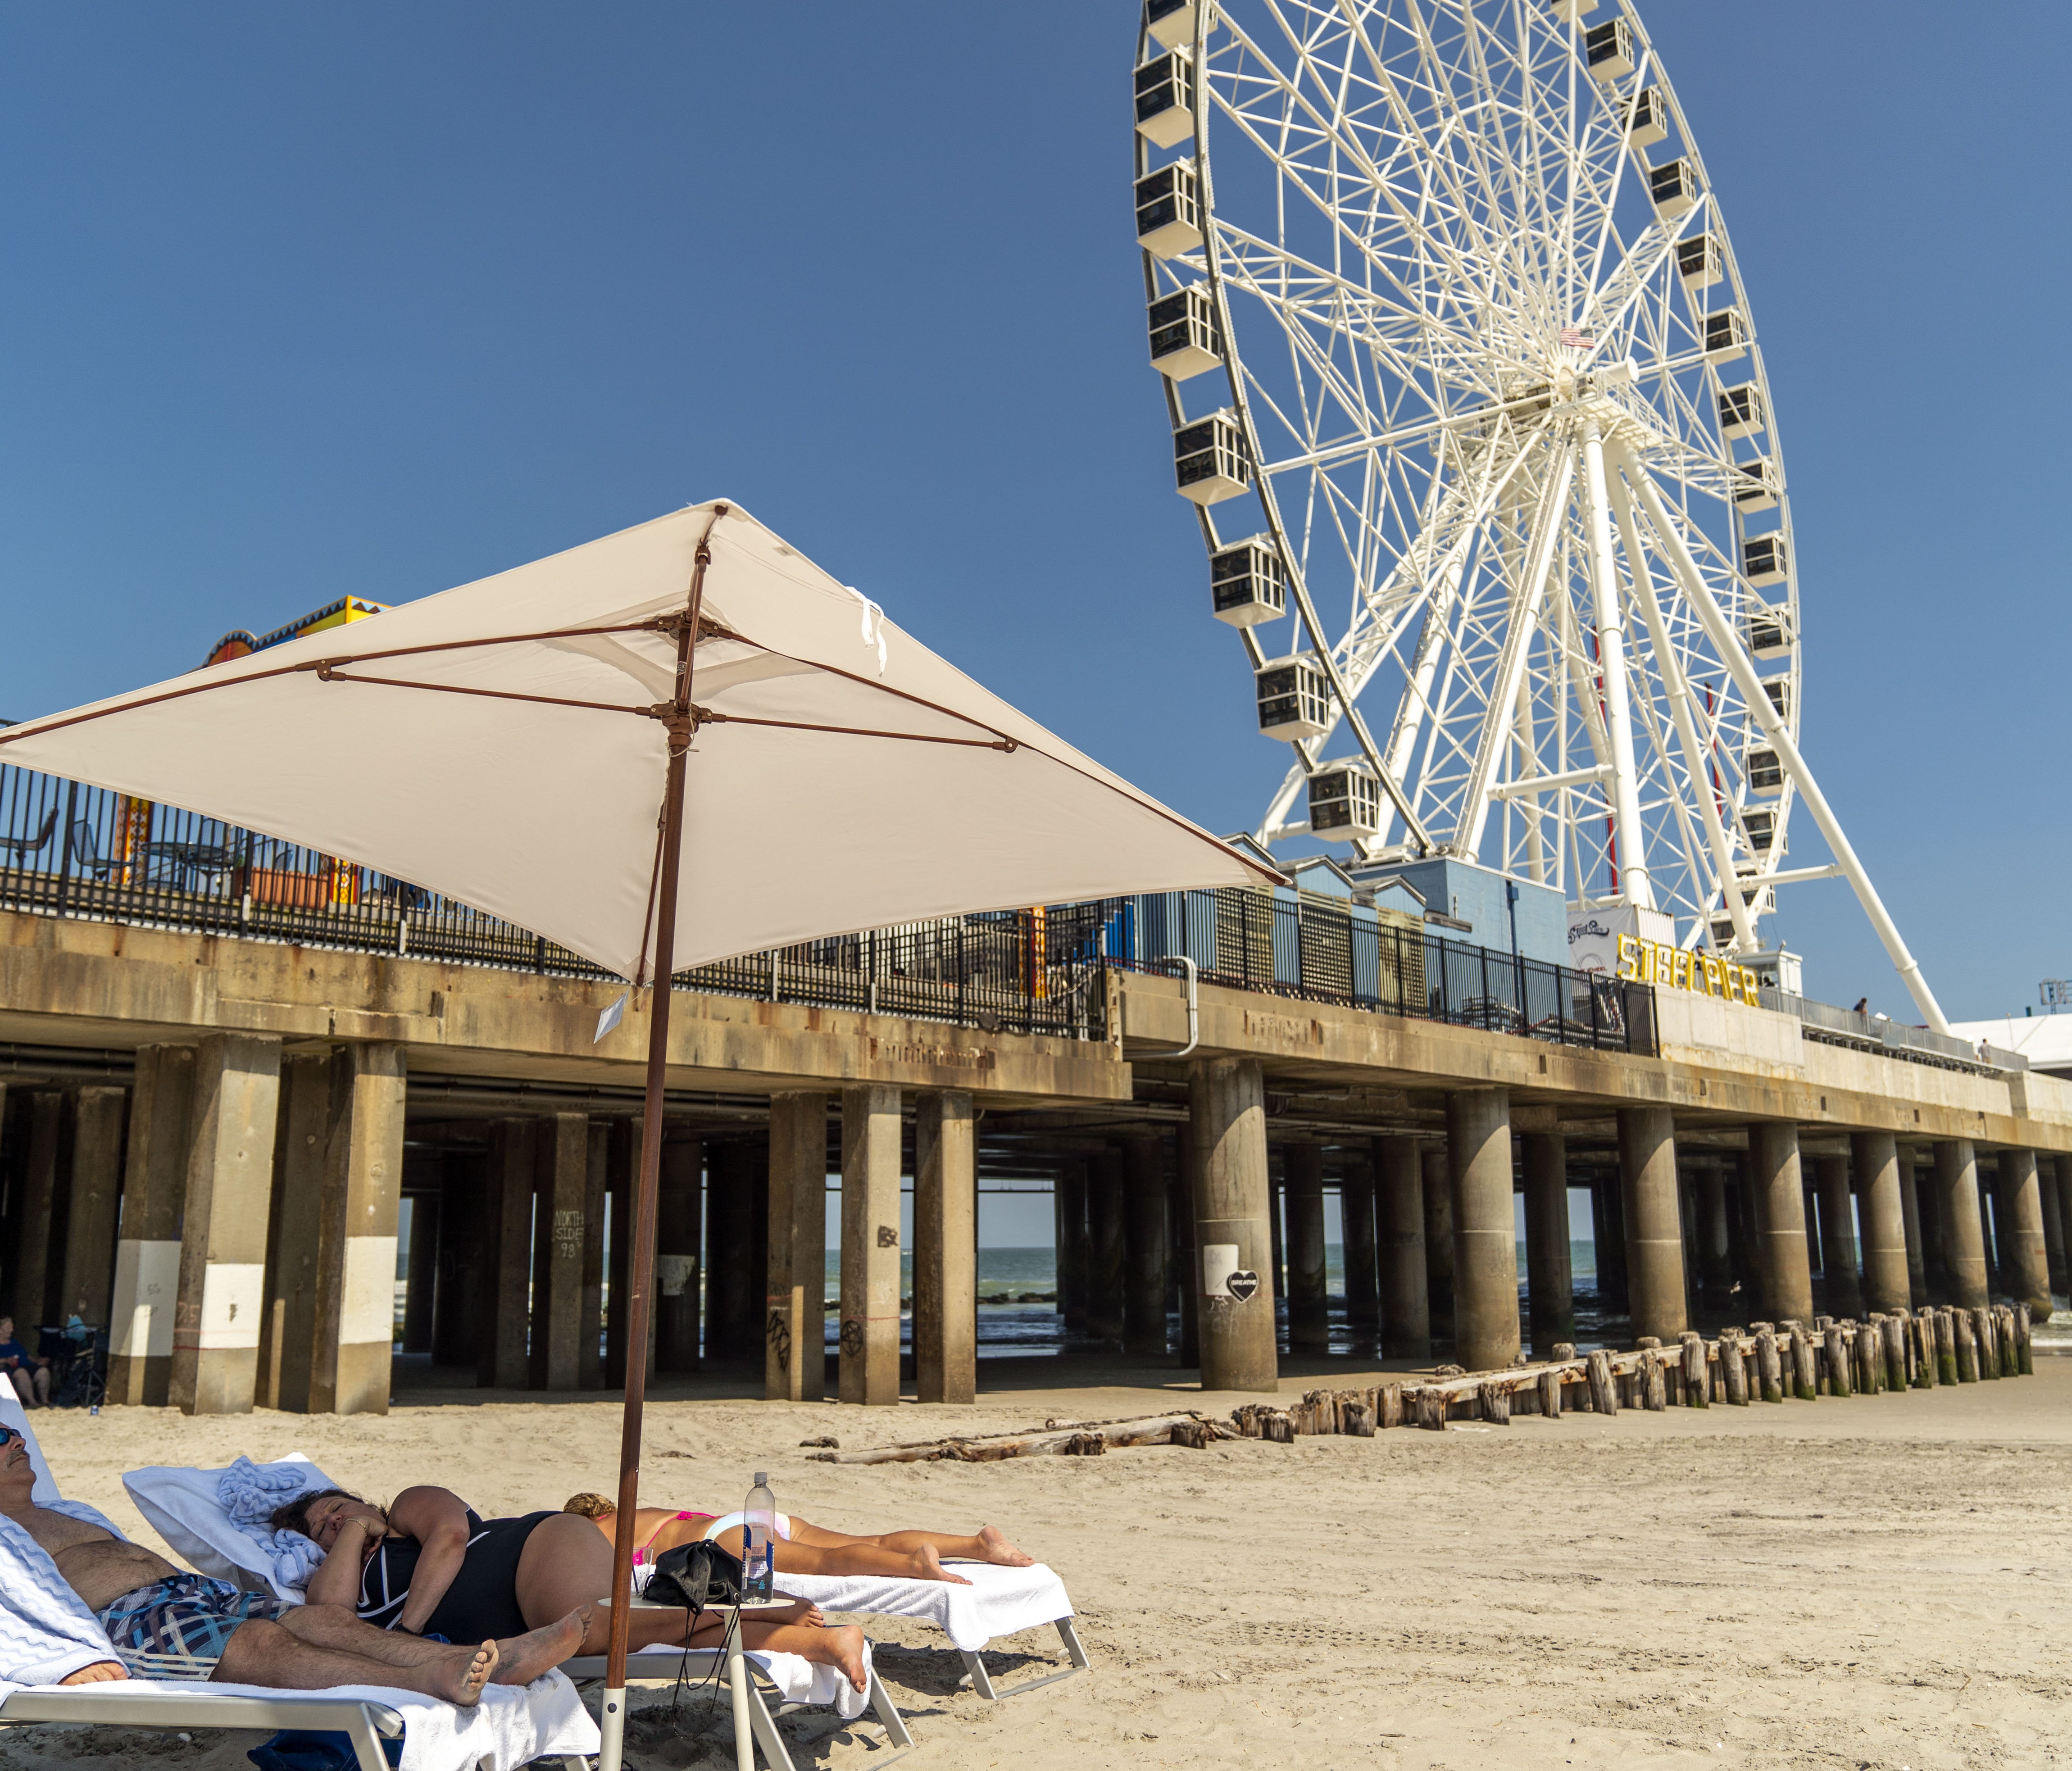 Visitors lounge on the beach on Atlantic City, New Jersey.